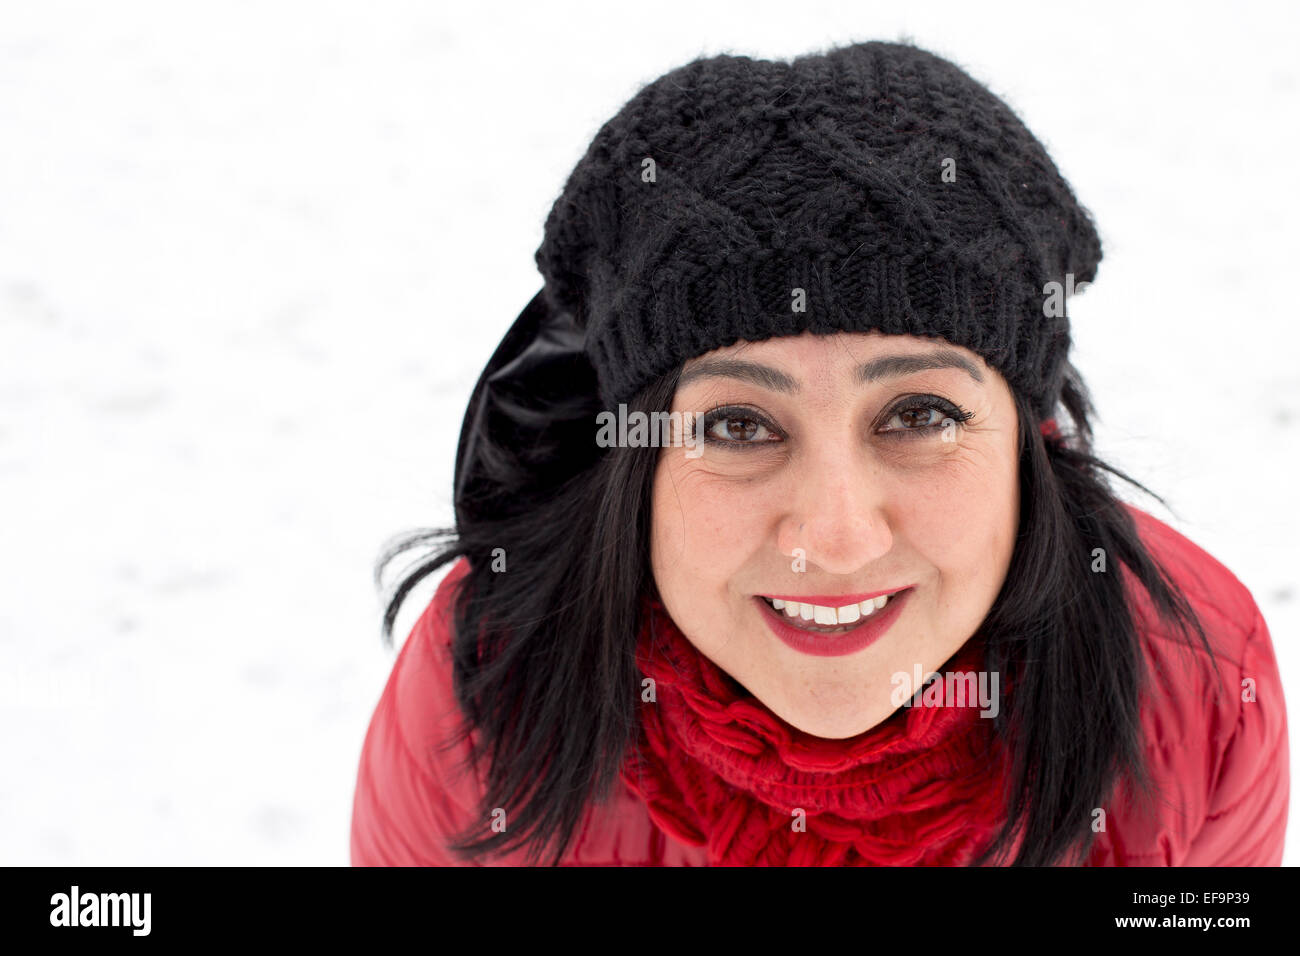 Black haired Turkish women looking at the camera on a snowy day background Stock Photo